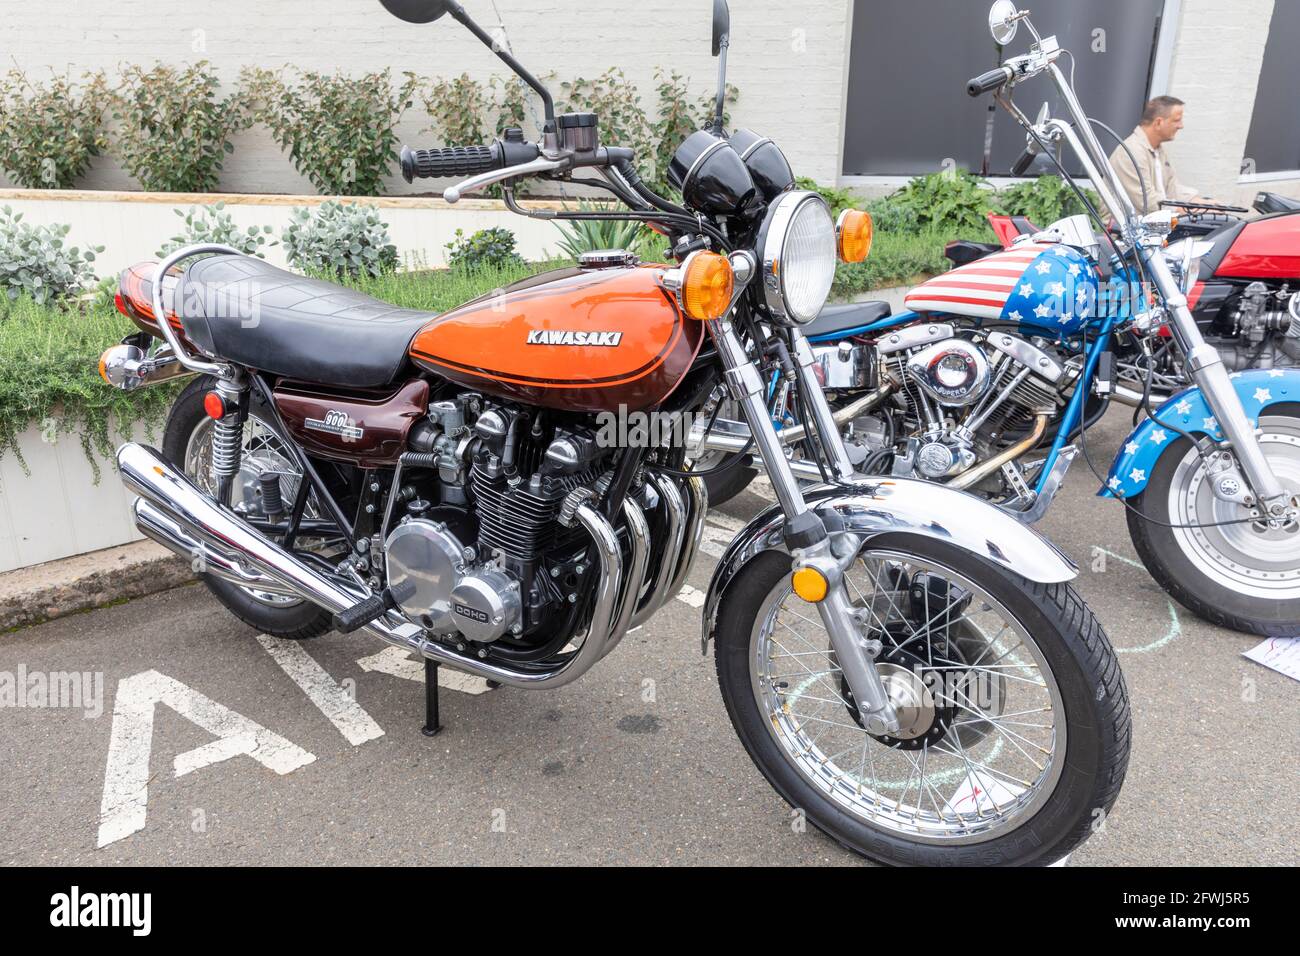 1973 model z900 on display at a classic vehicle show in Pittwater,Sydney,Australia Stock Photo Alamy